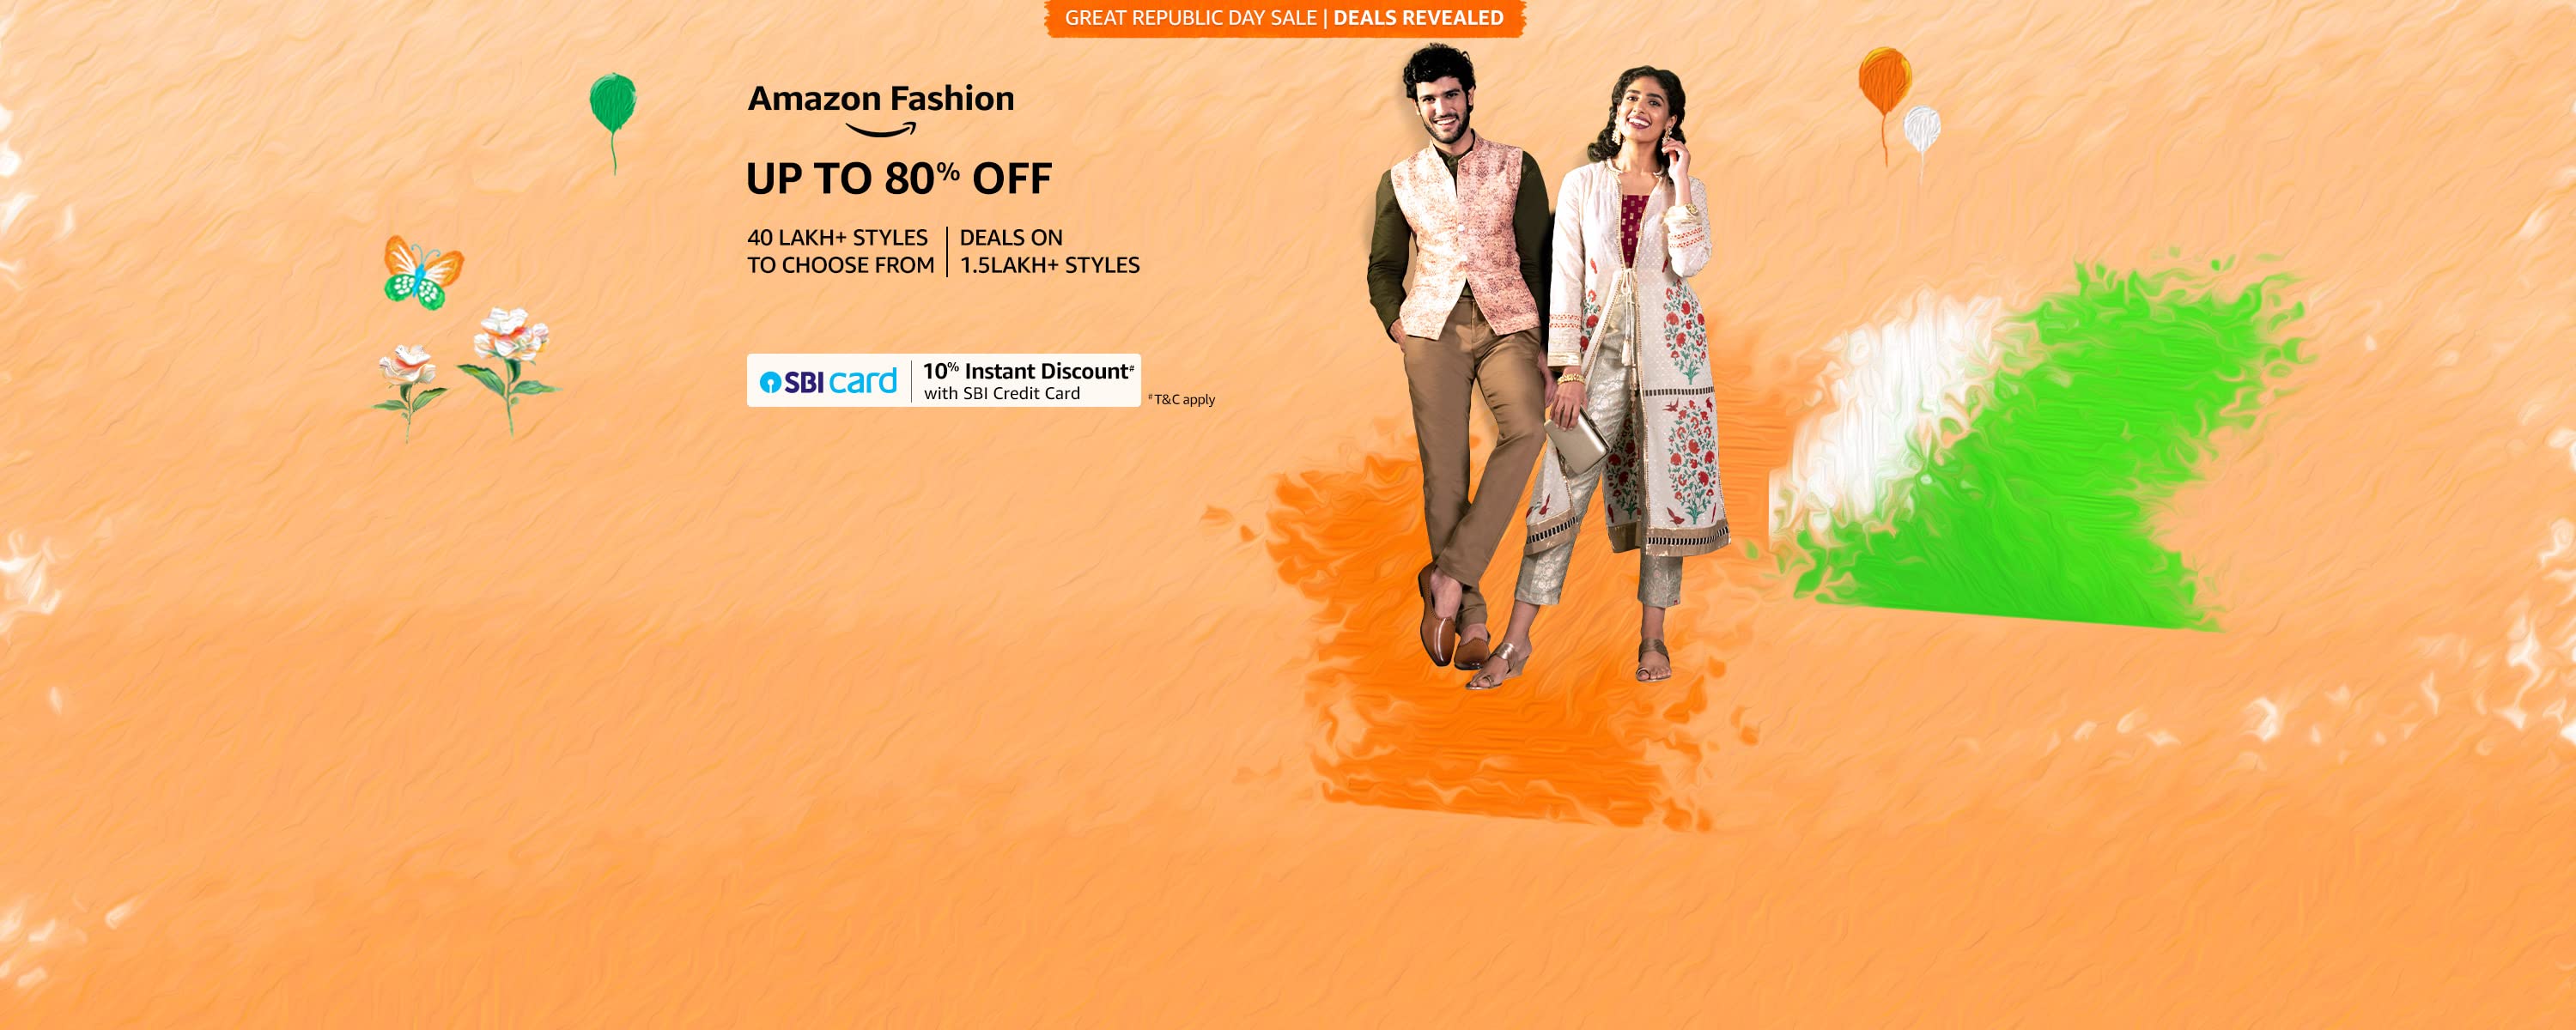 GREAT REPUBLIC DAY SALE | Get Upto 40% Off On Fashion & Accessories . Sale Starts 24 Hours Early For Prime Members